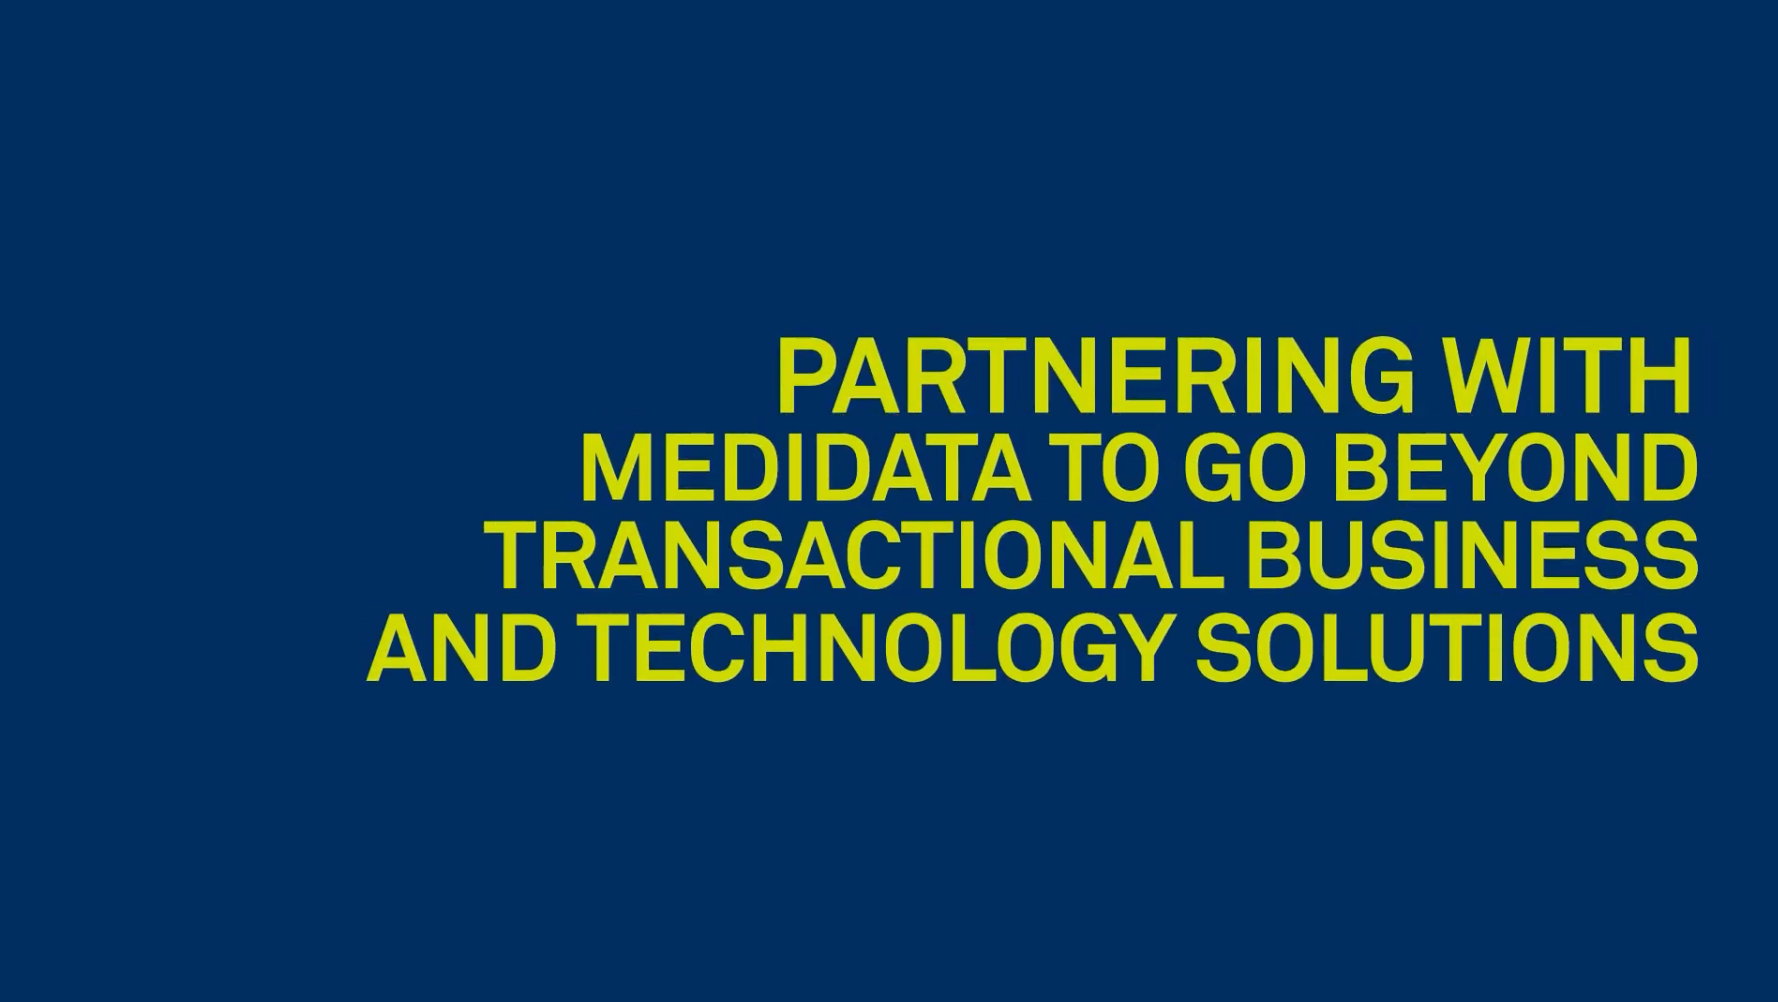 Partnering with Medidata to go Beyond Transactional Business and Technology Solutions